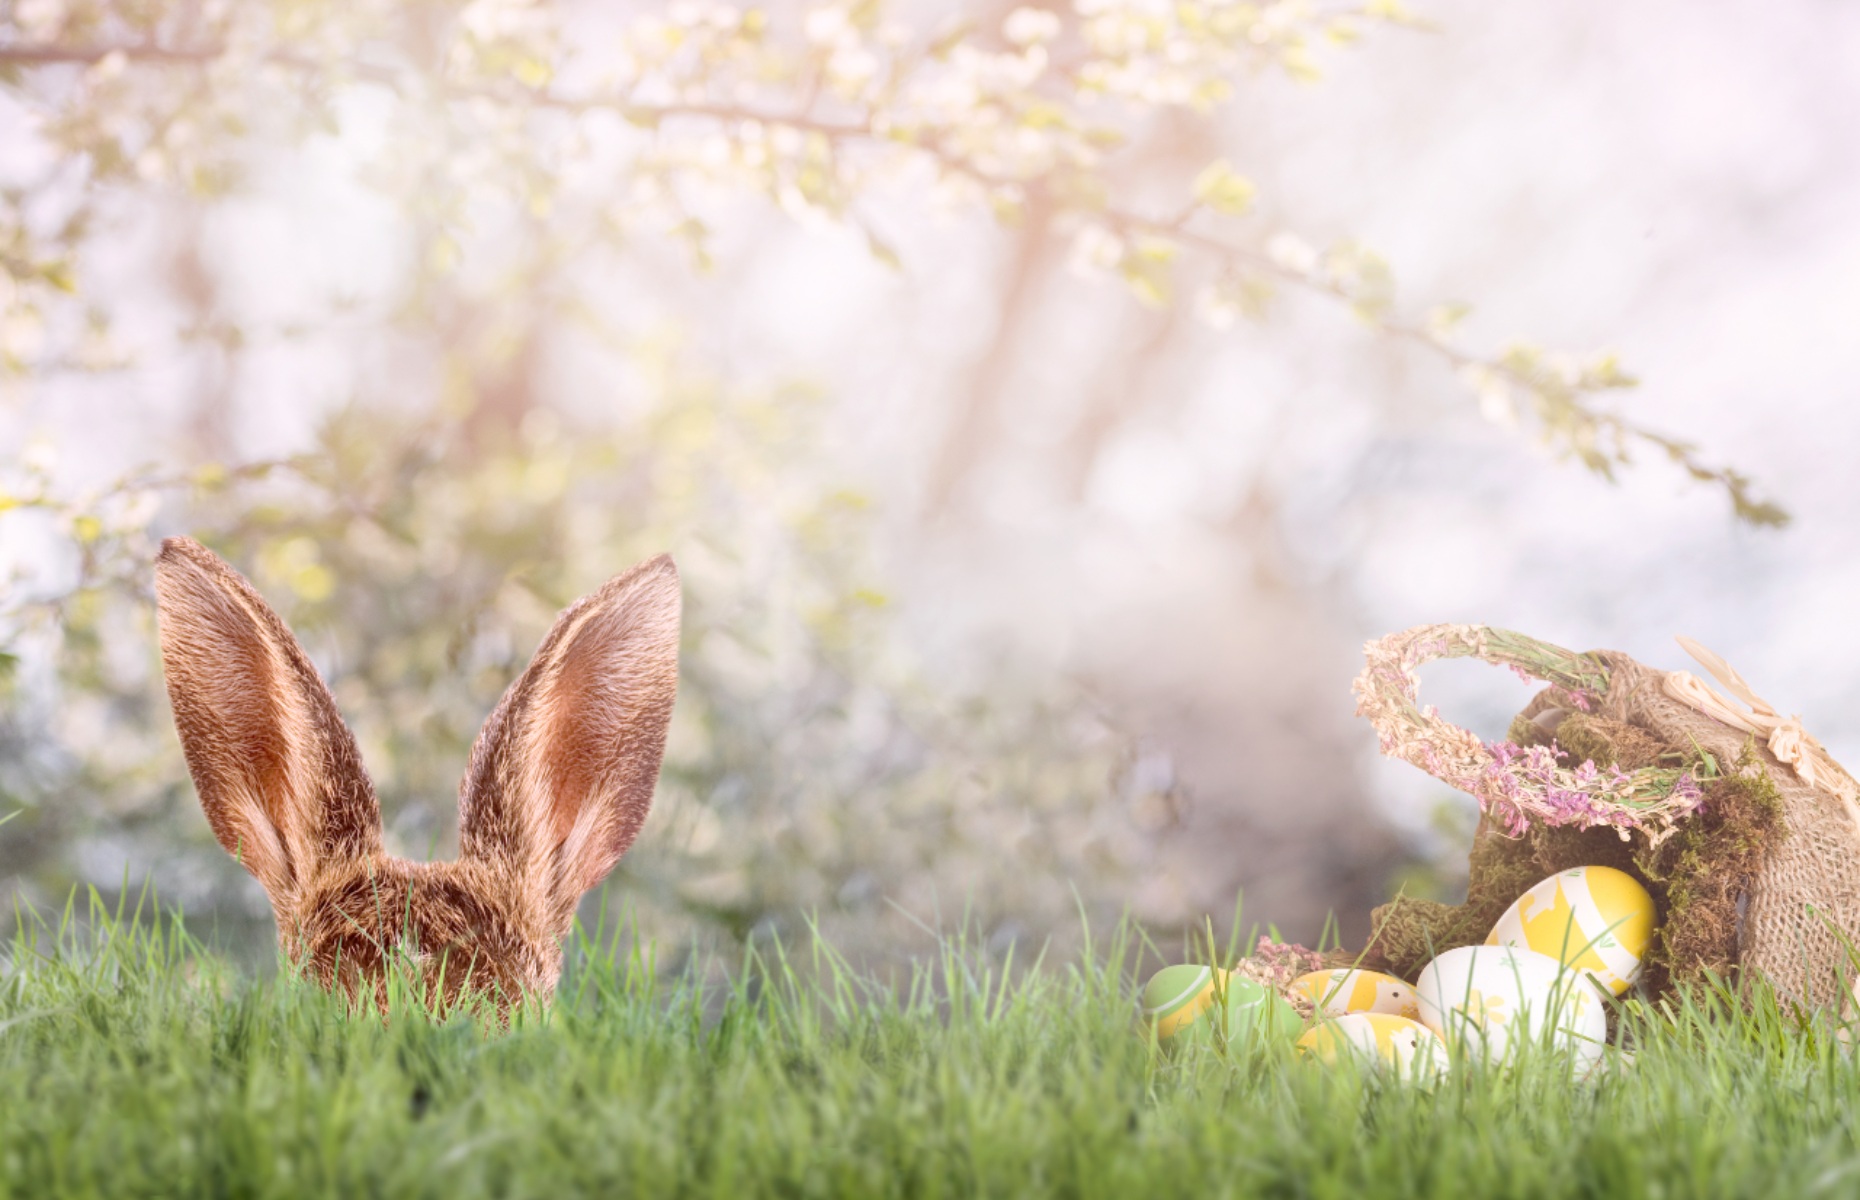 The Easter bunny (Image: Photo-SD/Shutterstock)